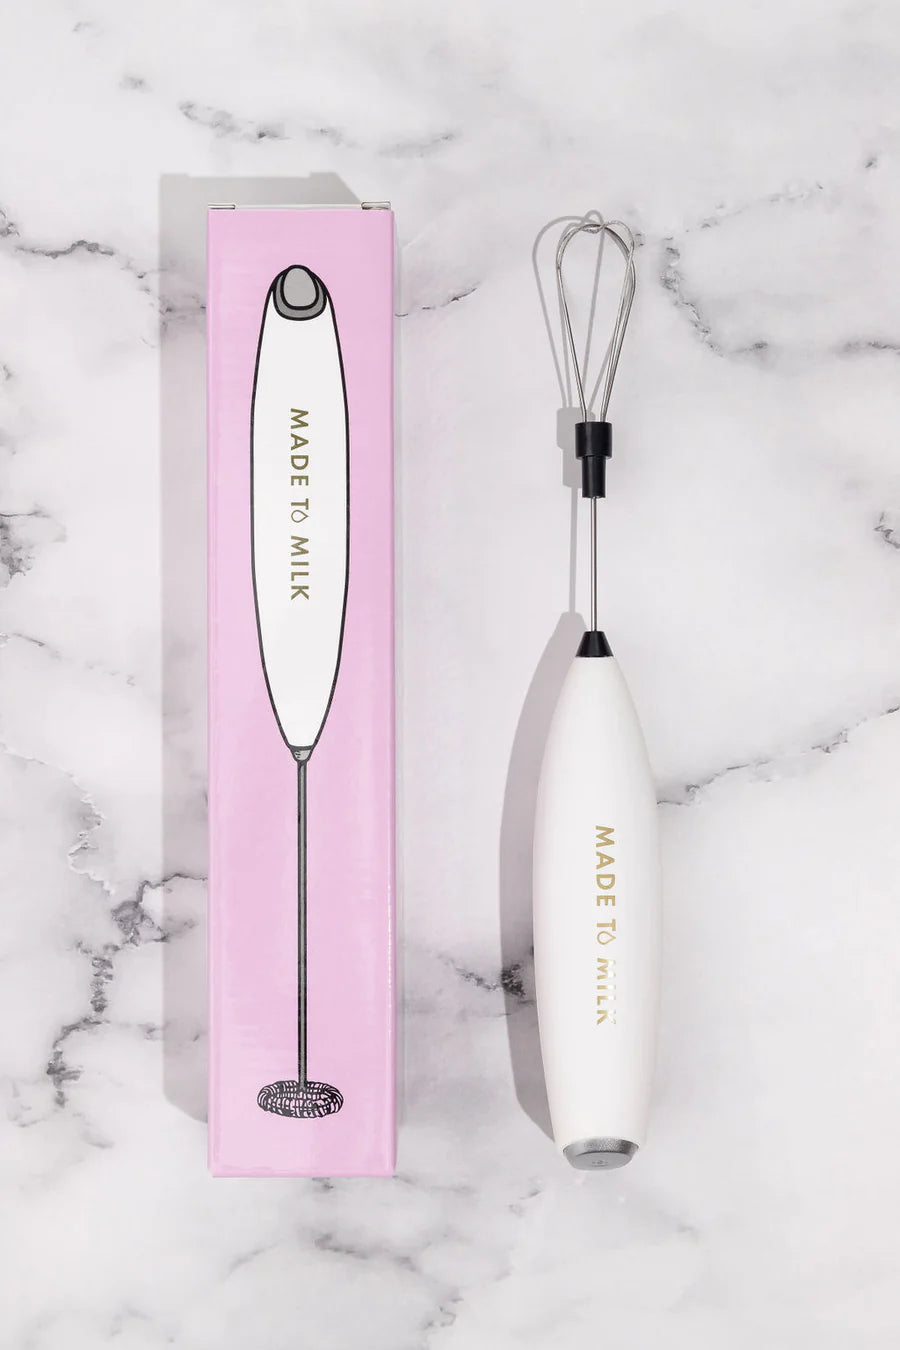 Handheld Milk Frother + Whisk